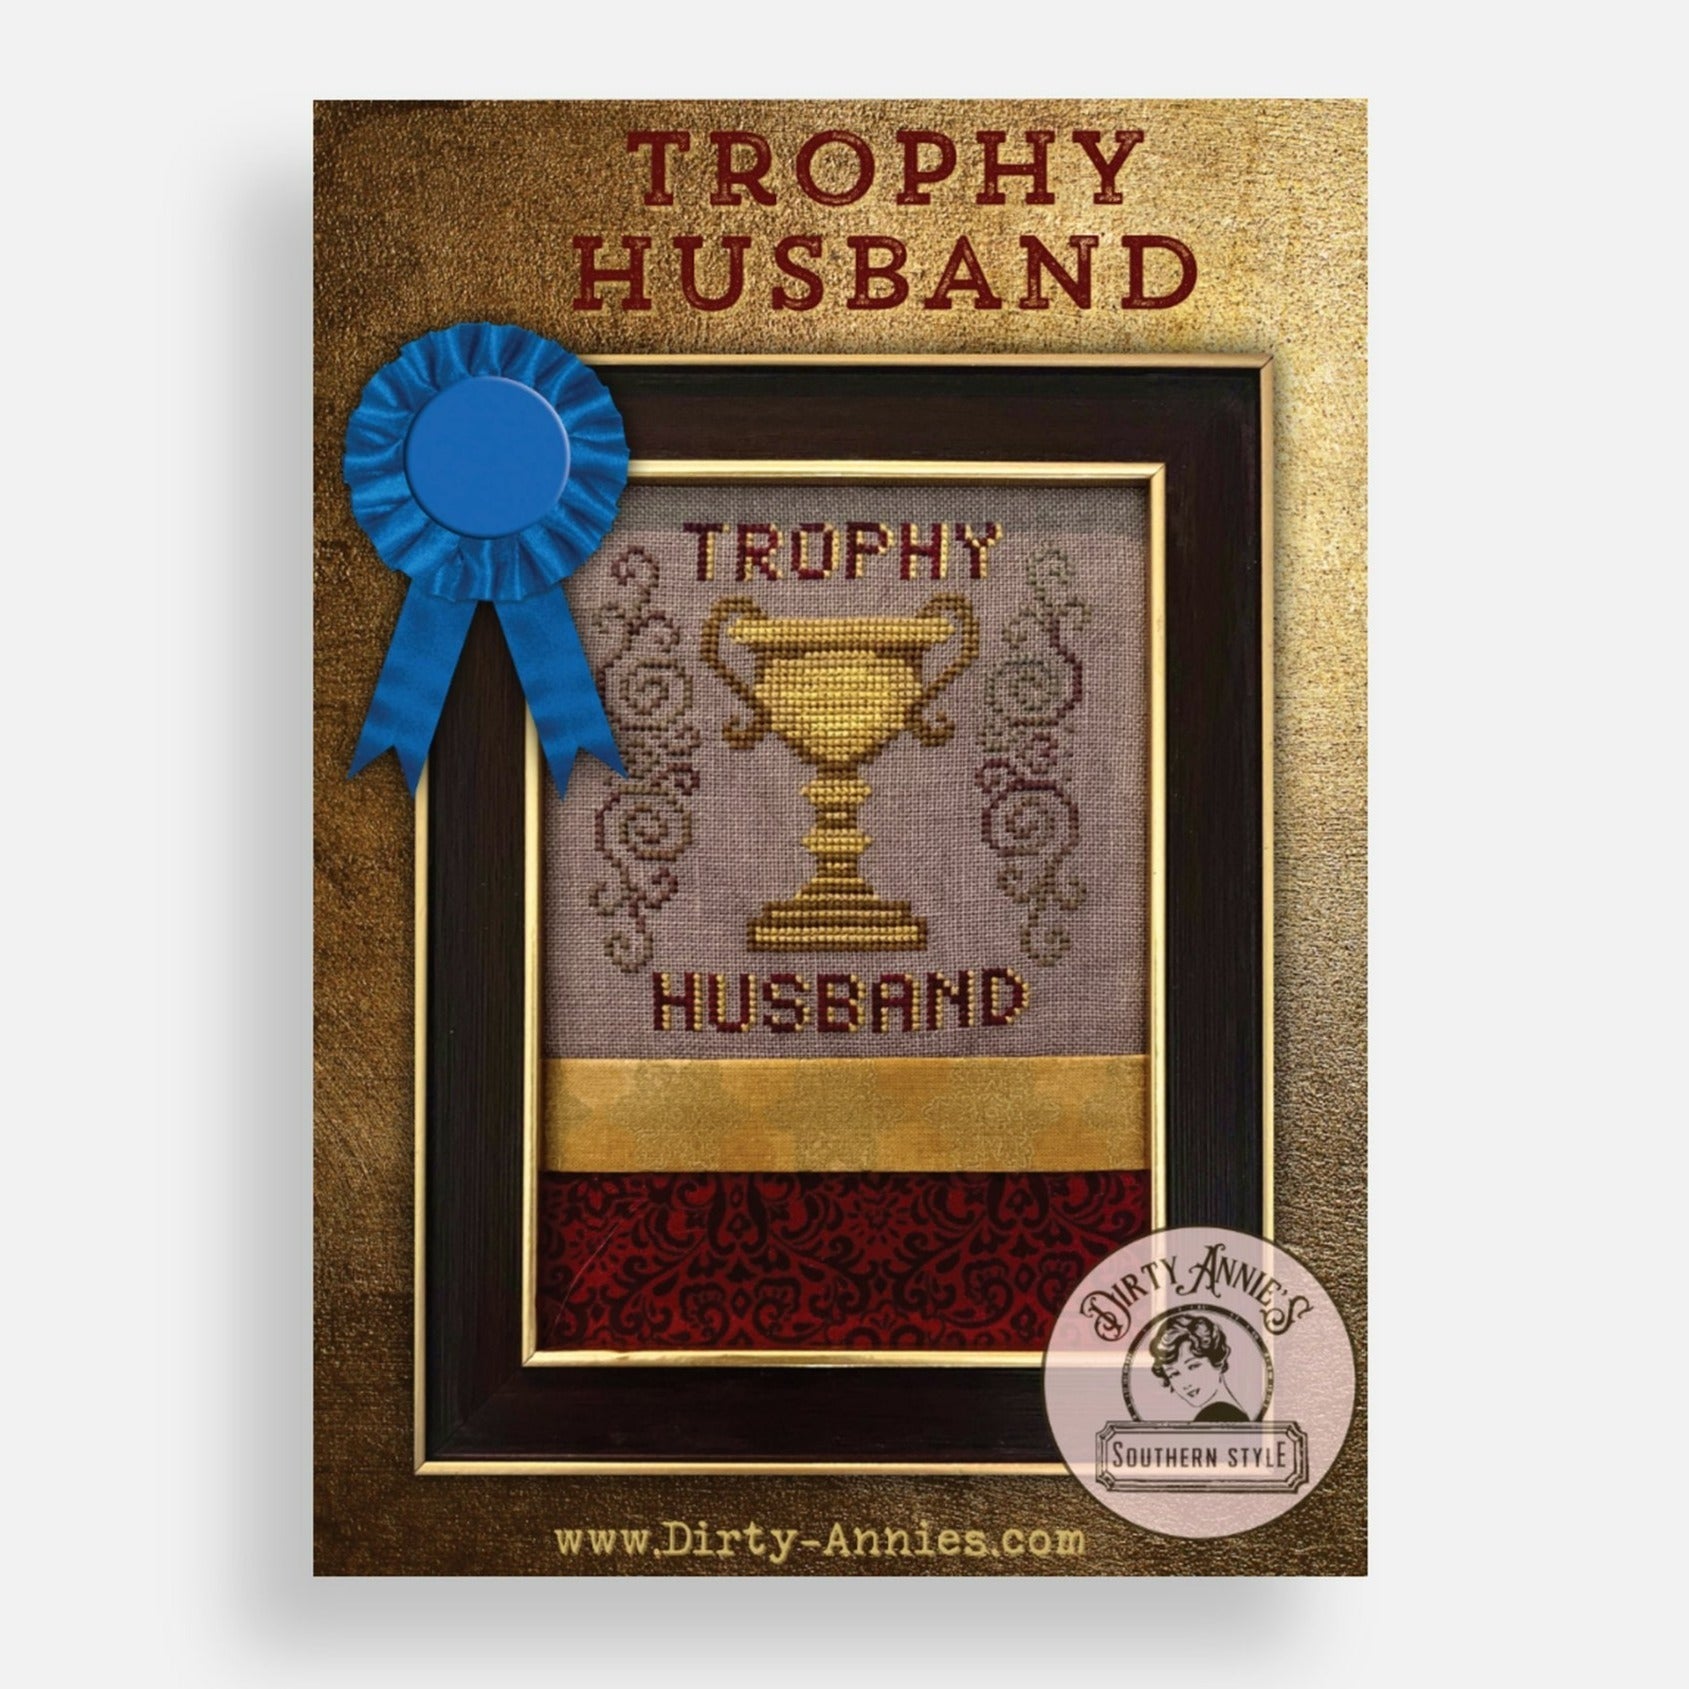 Trophy Husband by Dirty Annie's Southern Style